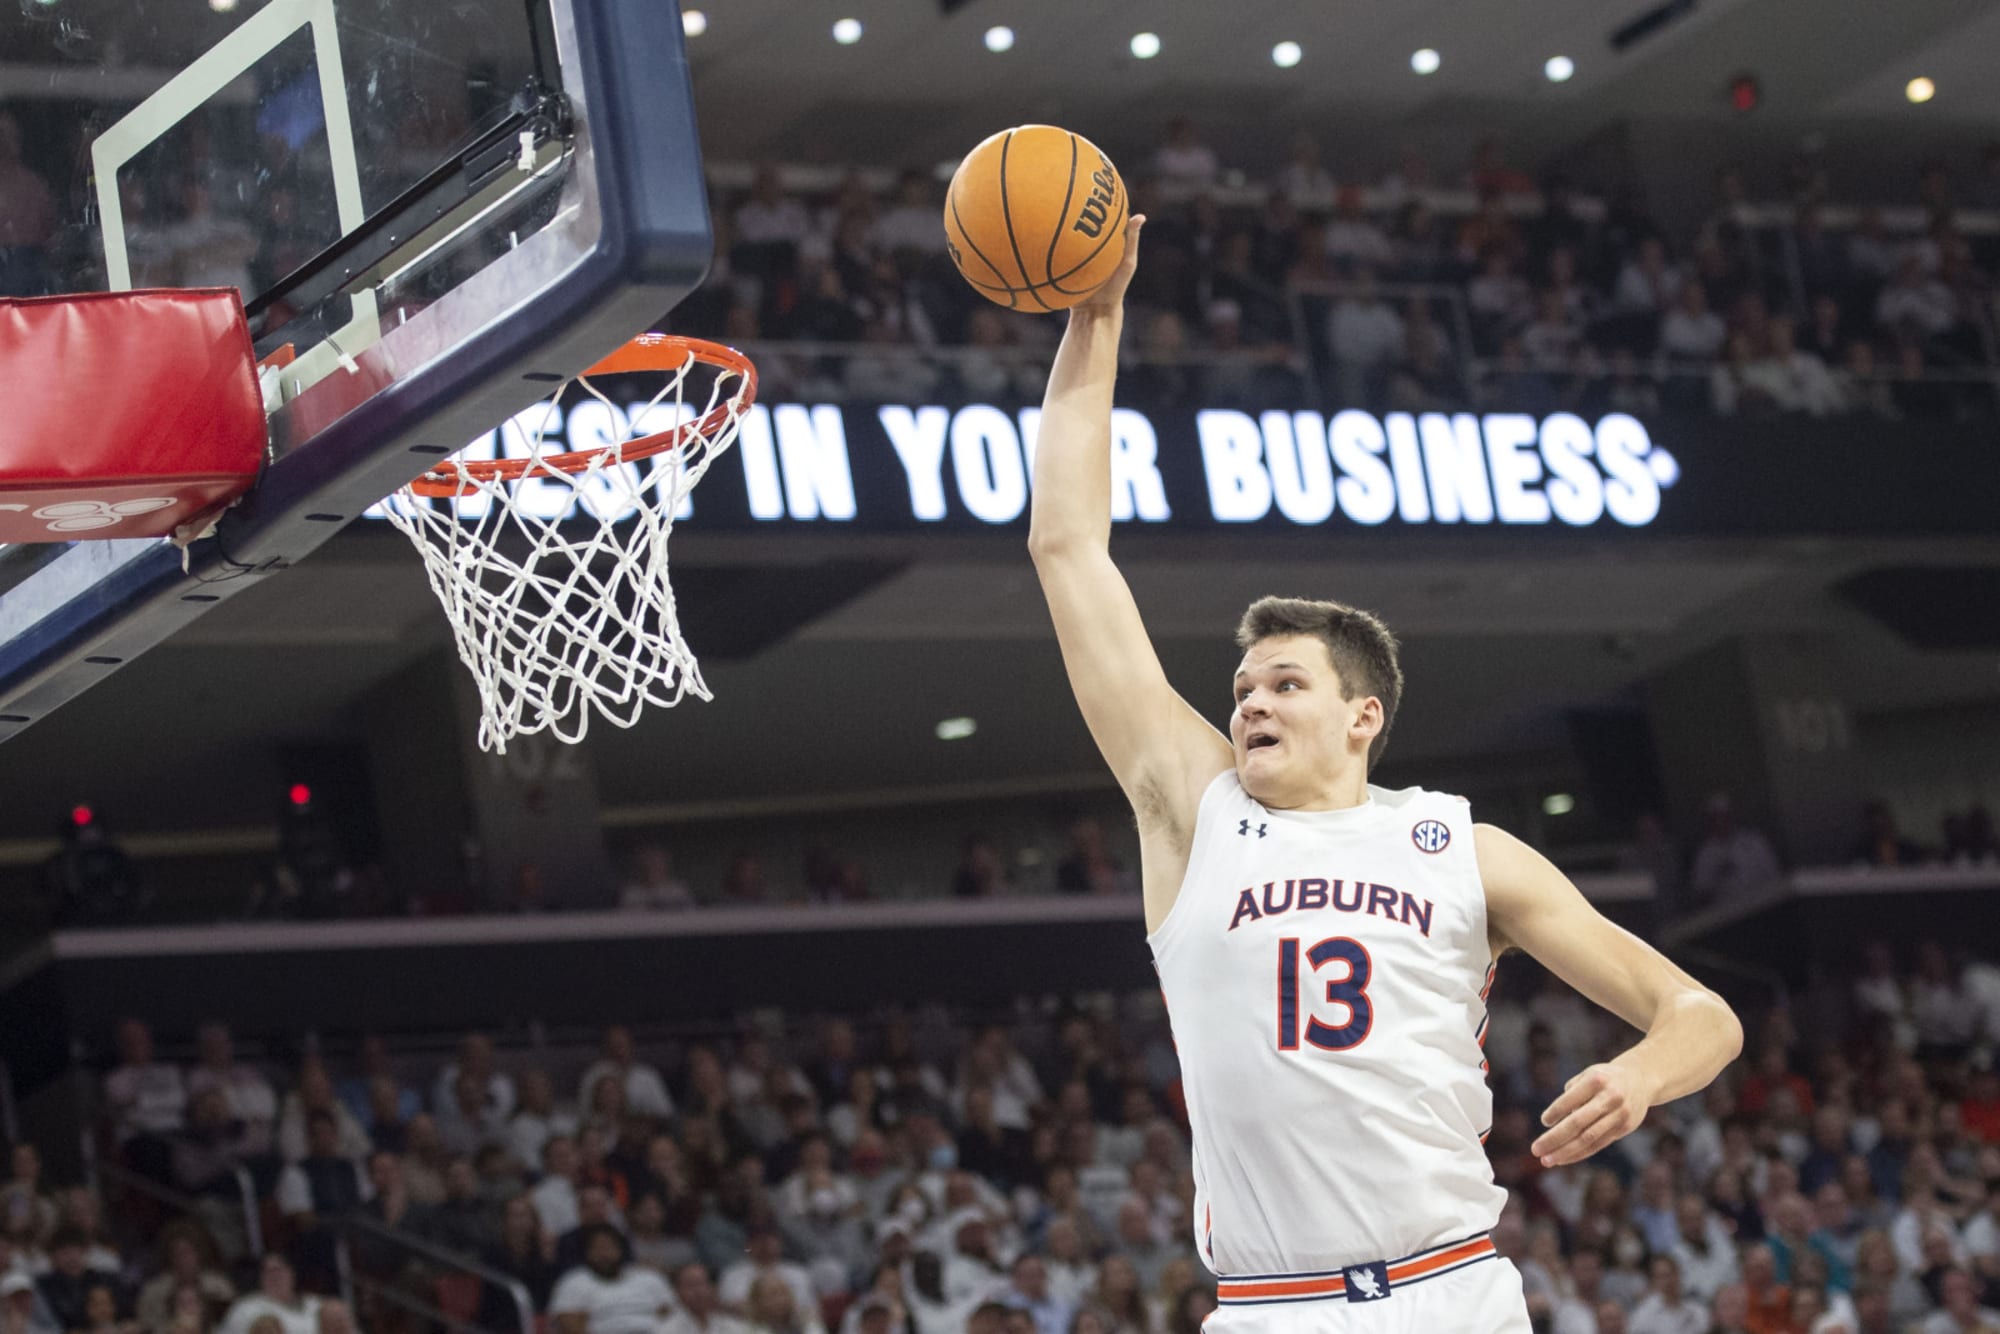 3 things you may not know about Auburn's Walker Kessler